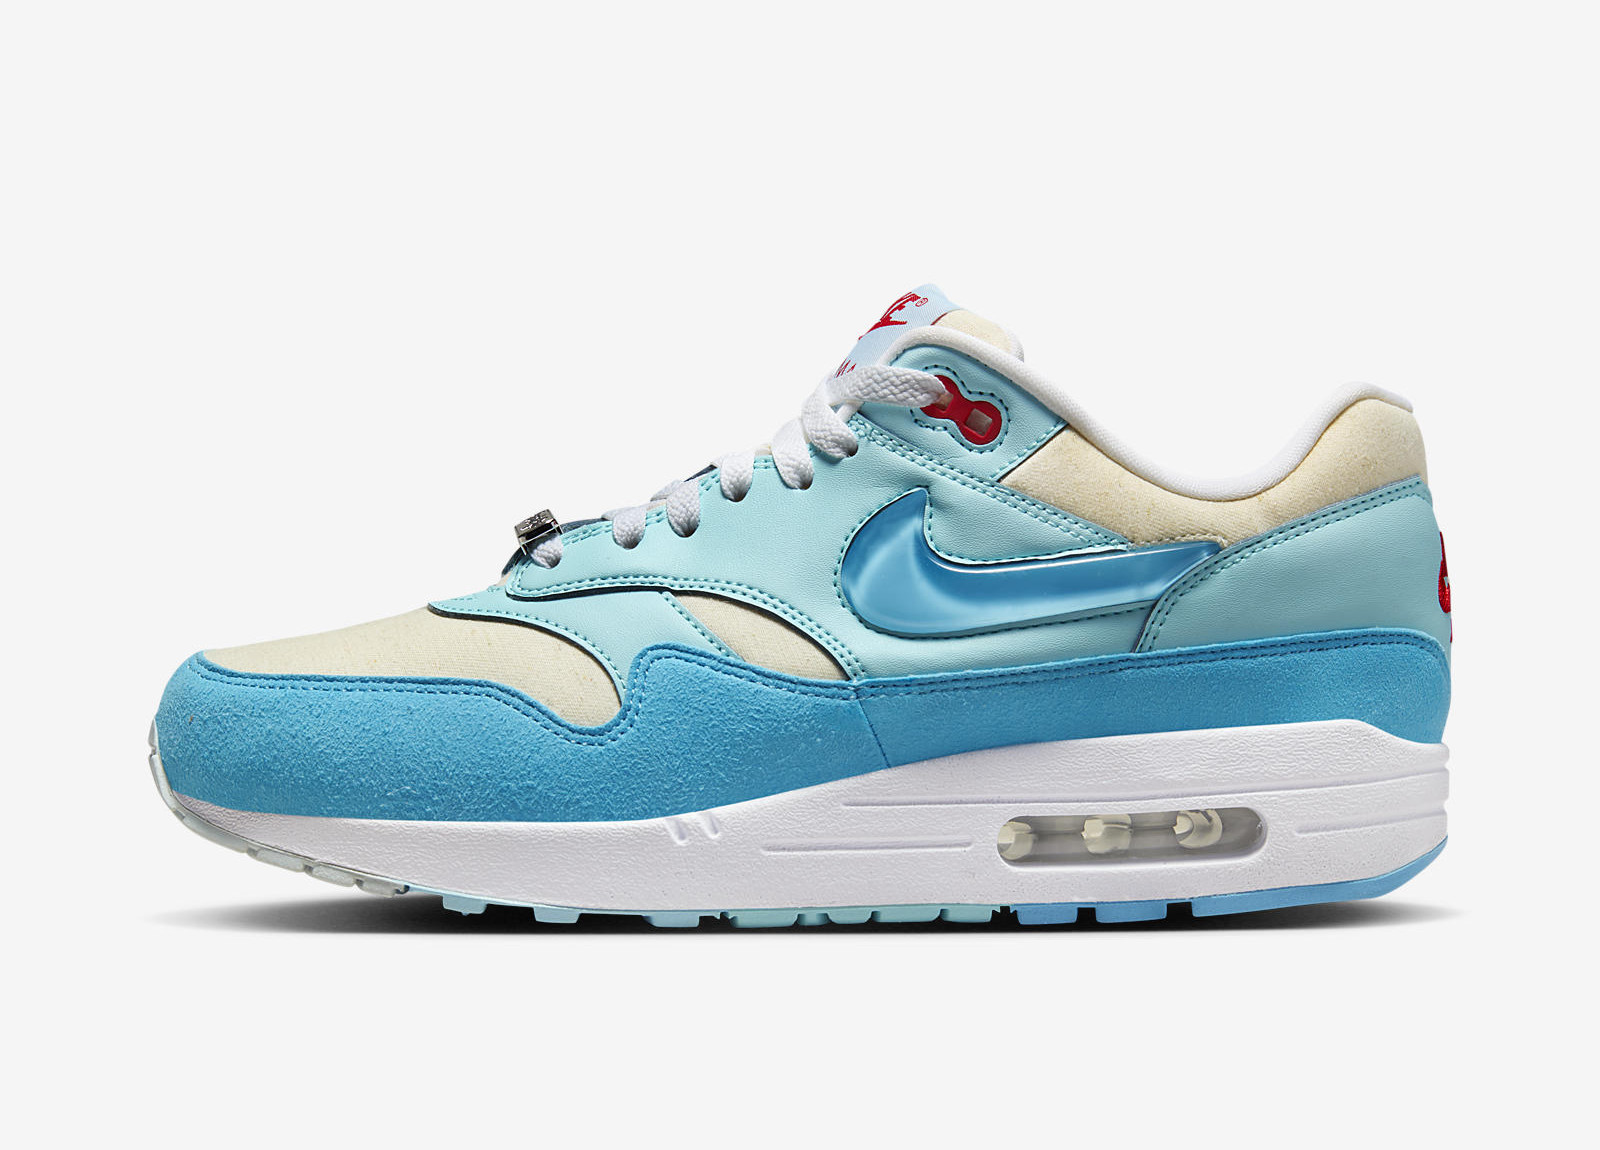 Puerto Rican Day x Nike
Air Max 1
« Blue Gale »